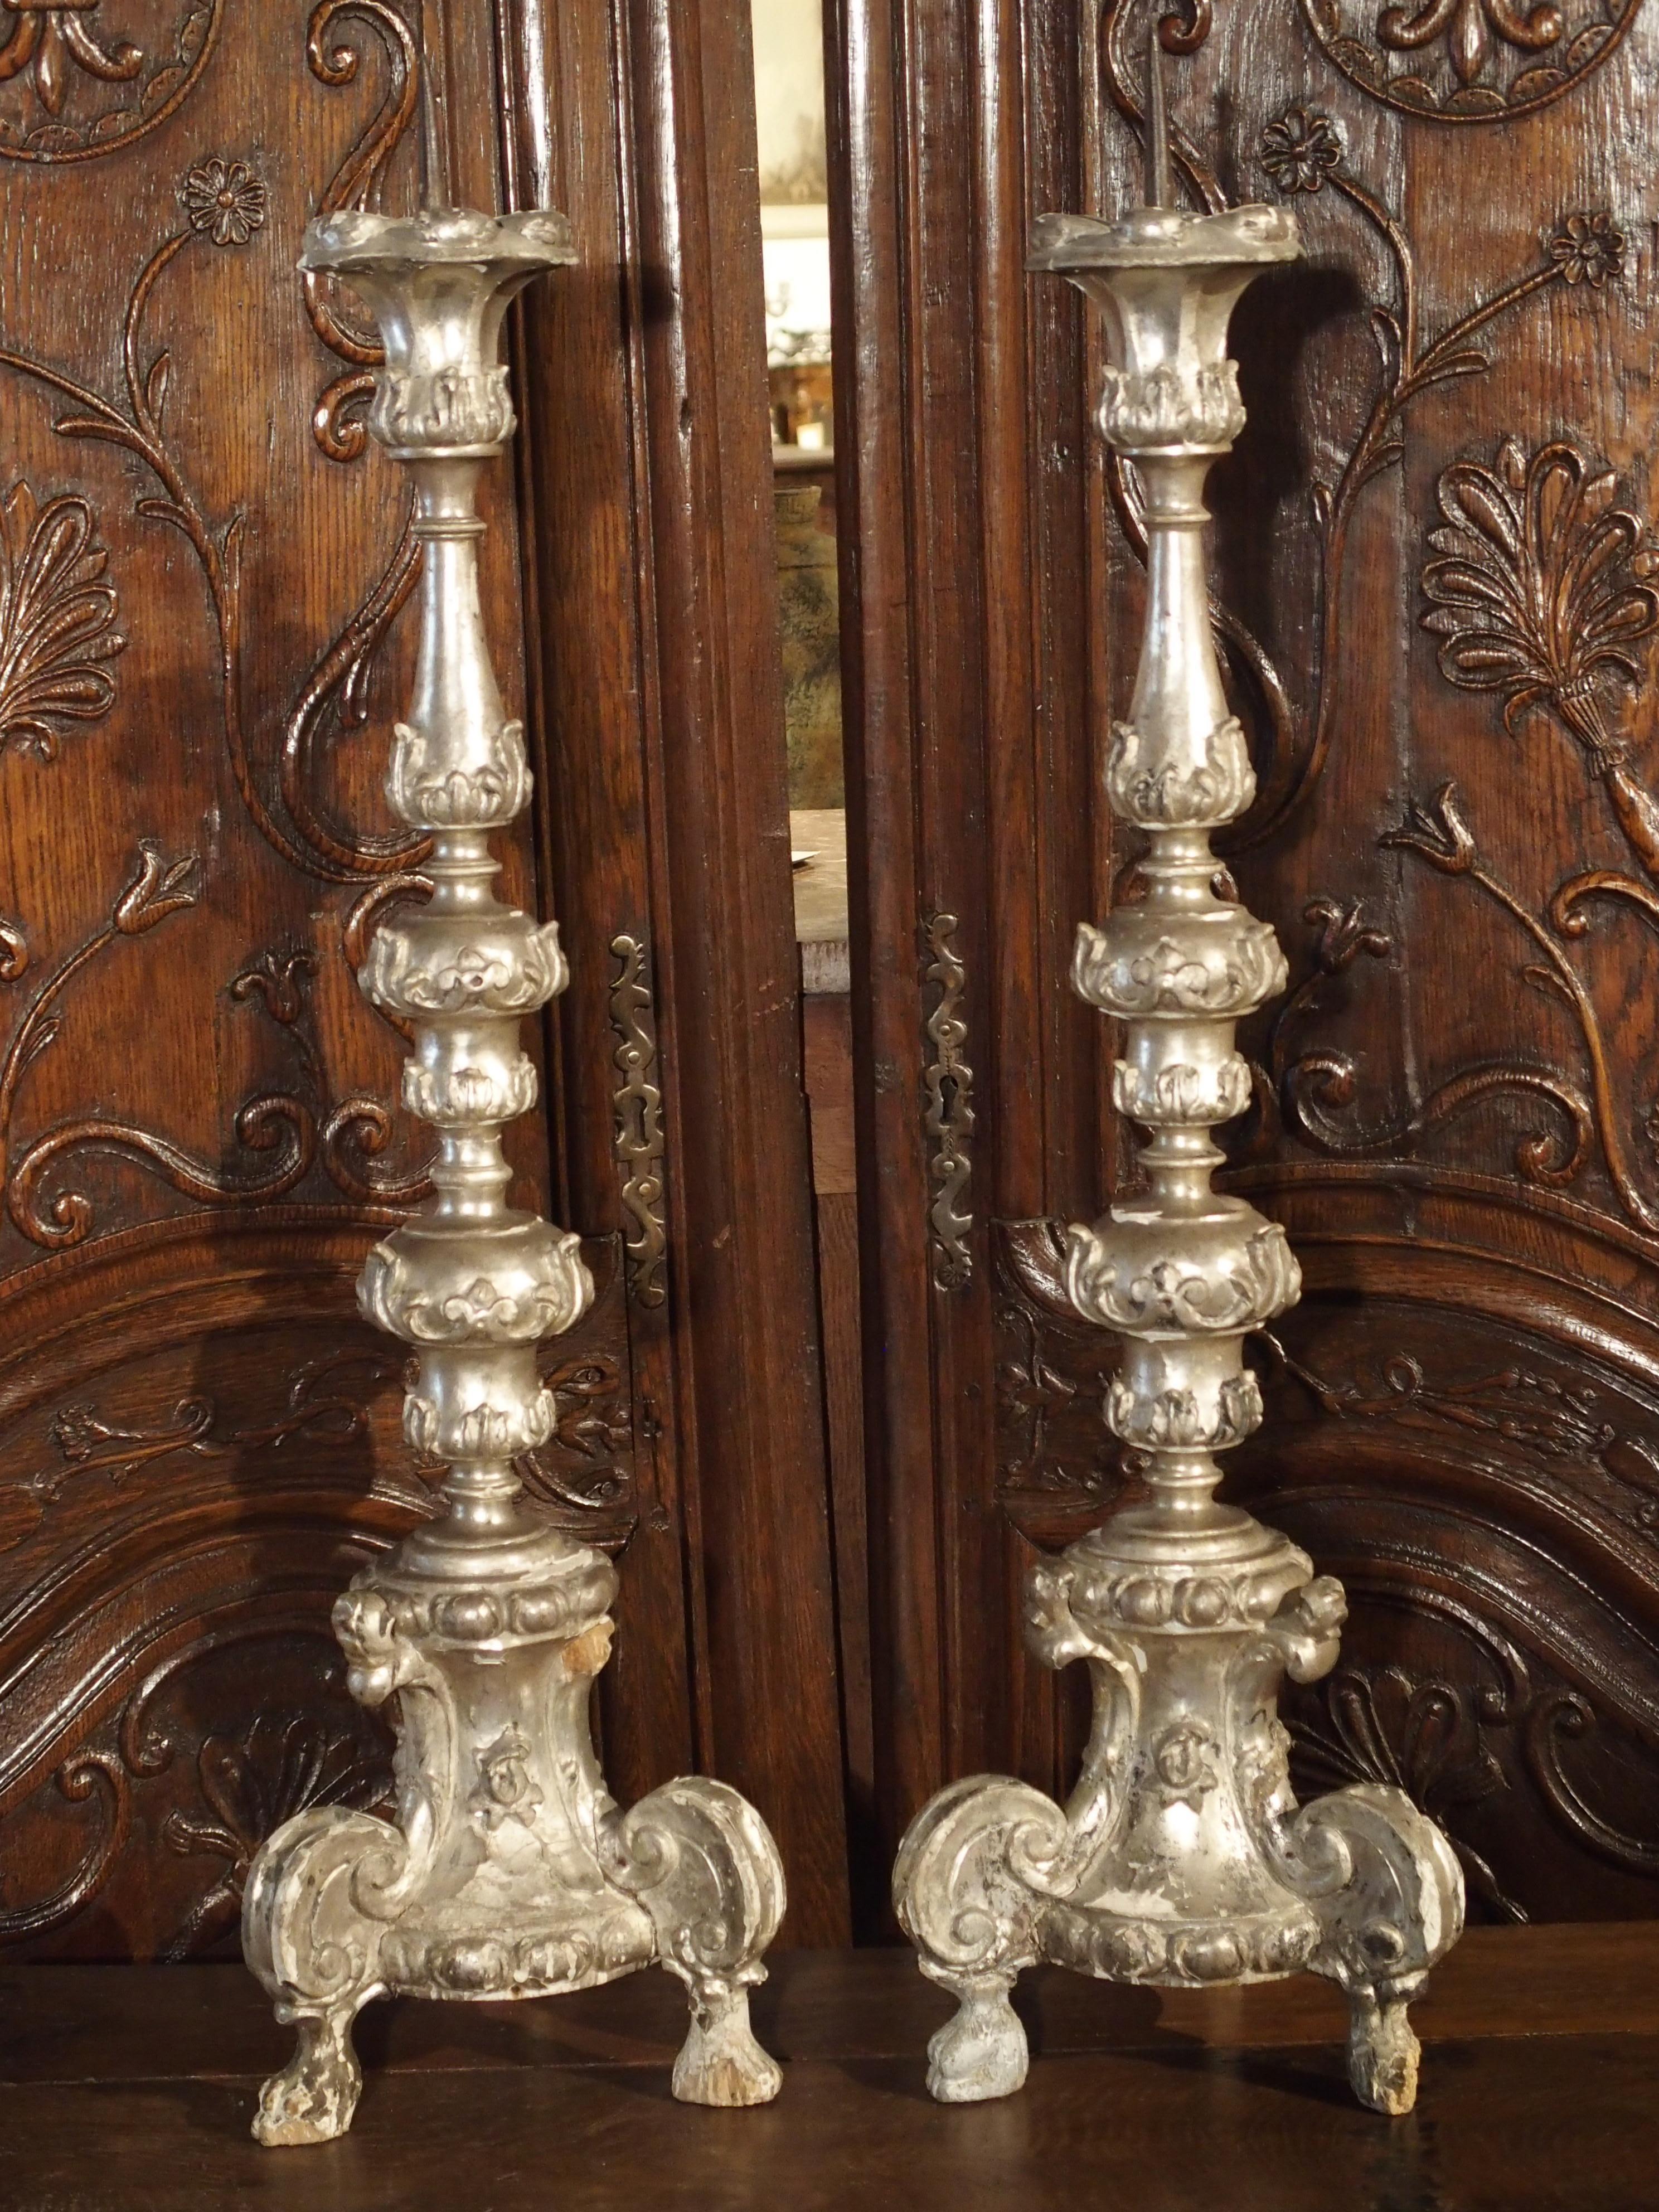 These tall silverleaf candlesticks date to the Baroque period of Italy, circa 1680.The tall shaped and turned stems all rest upon a tripod base with projecting c-scrolls and paw feet. The motifs are primarily varying forms of the acanthus leaf,